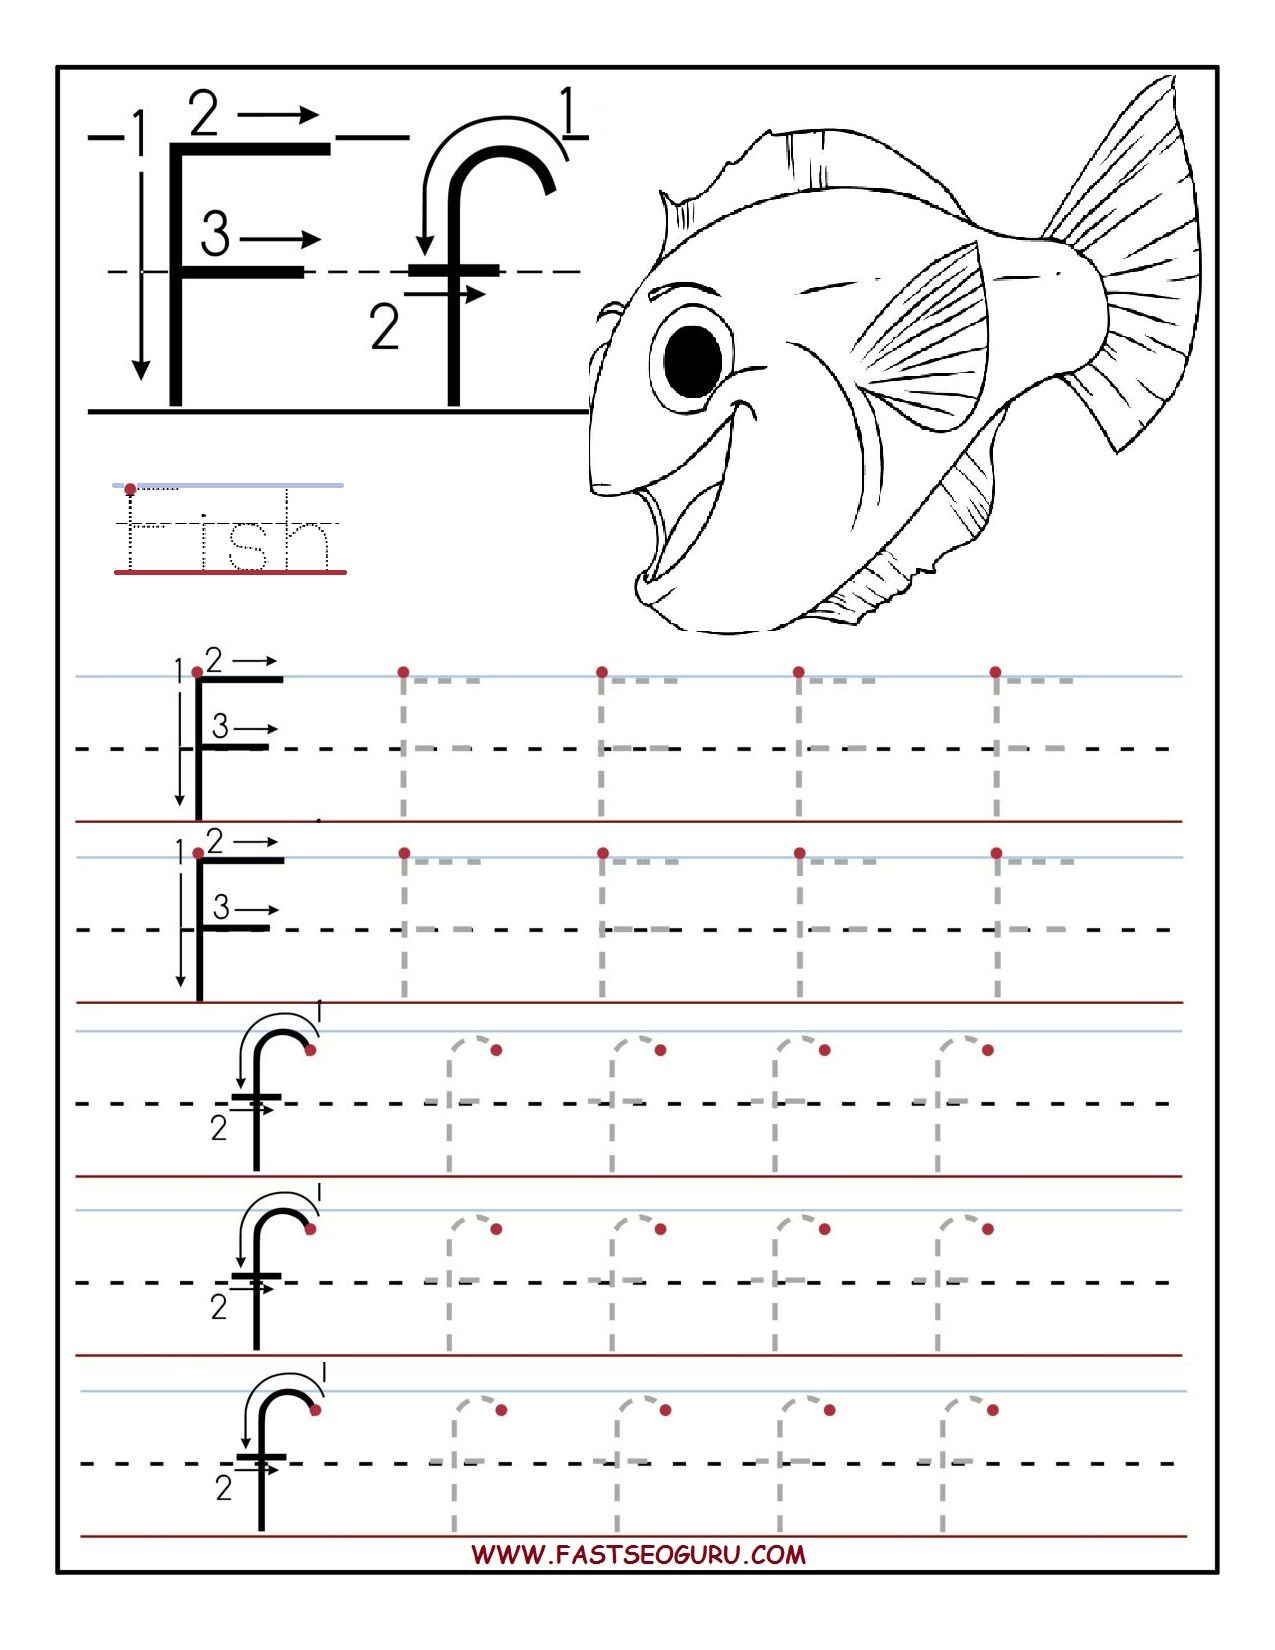 Printable Letter F Tracing Worksheets For Preschool | Pre-K with F Letter Worksheets Preschool